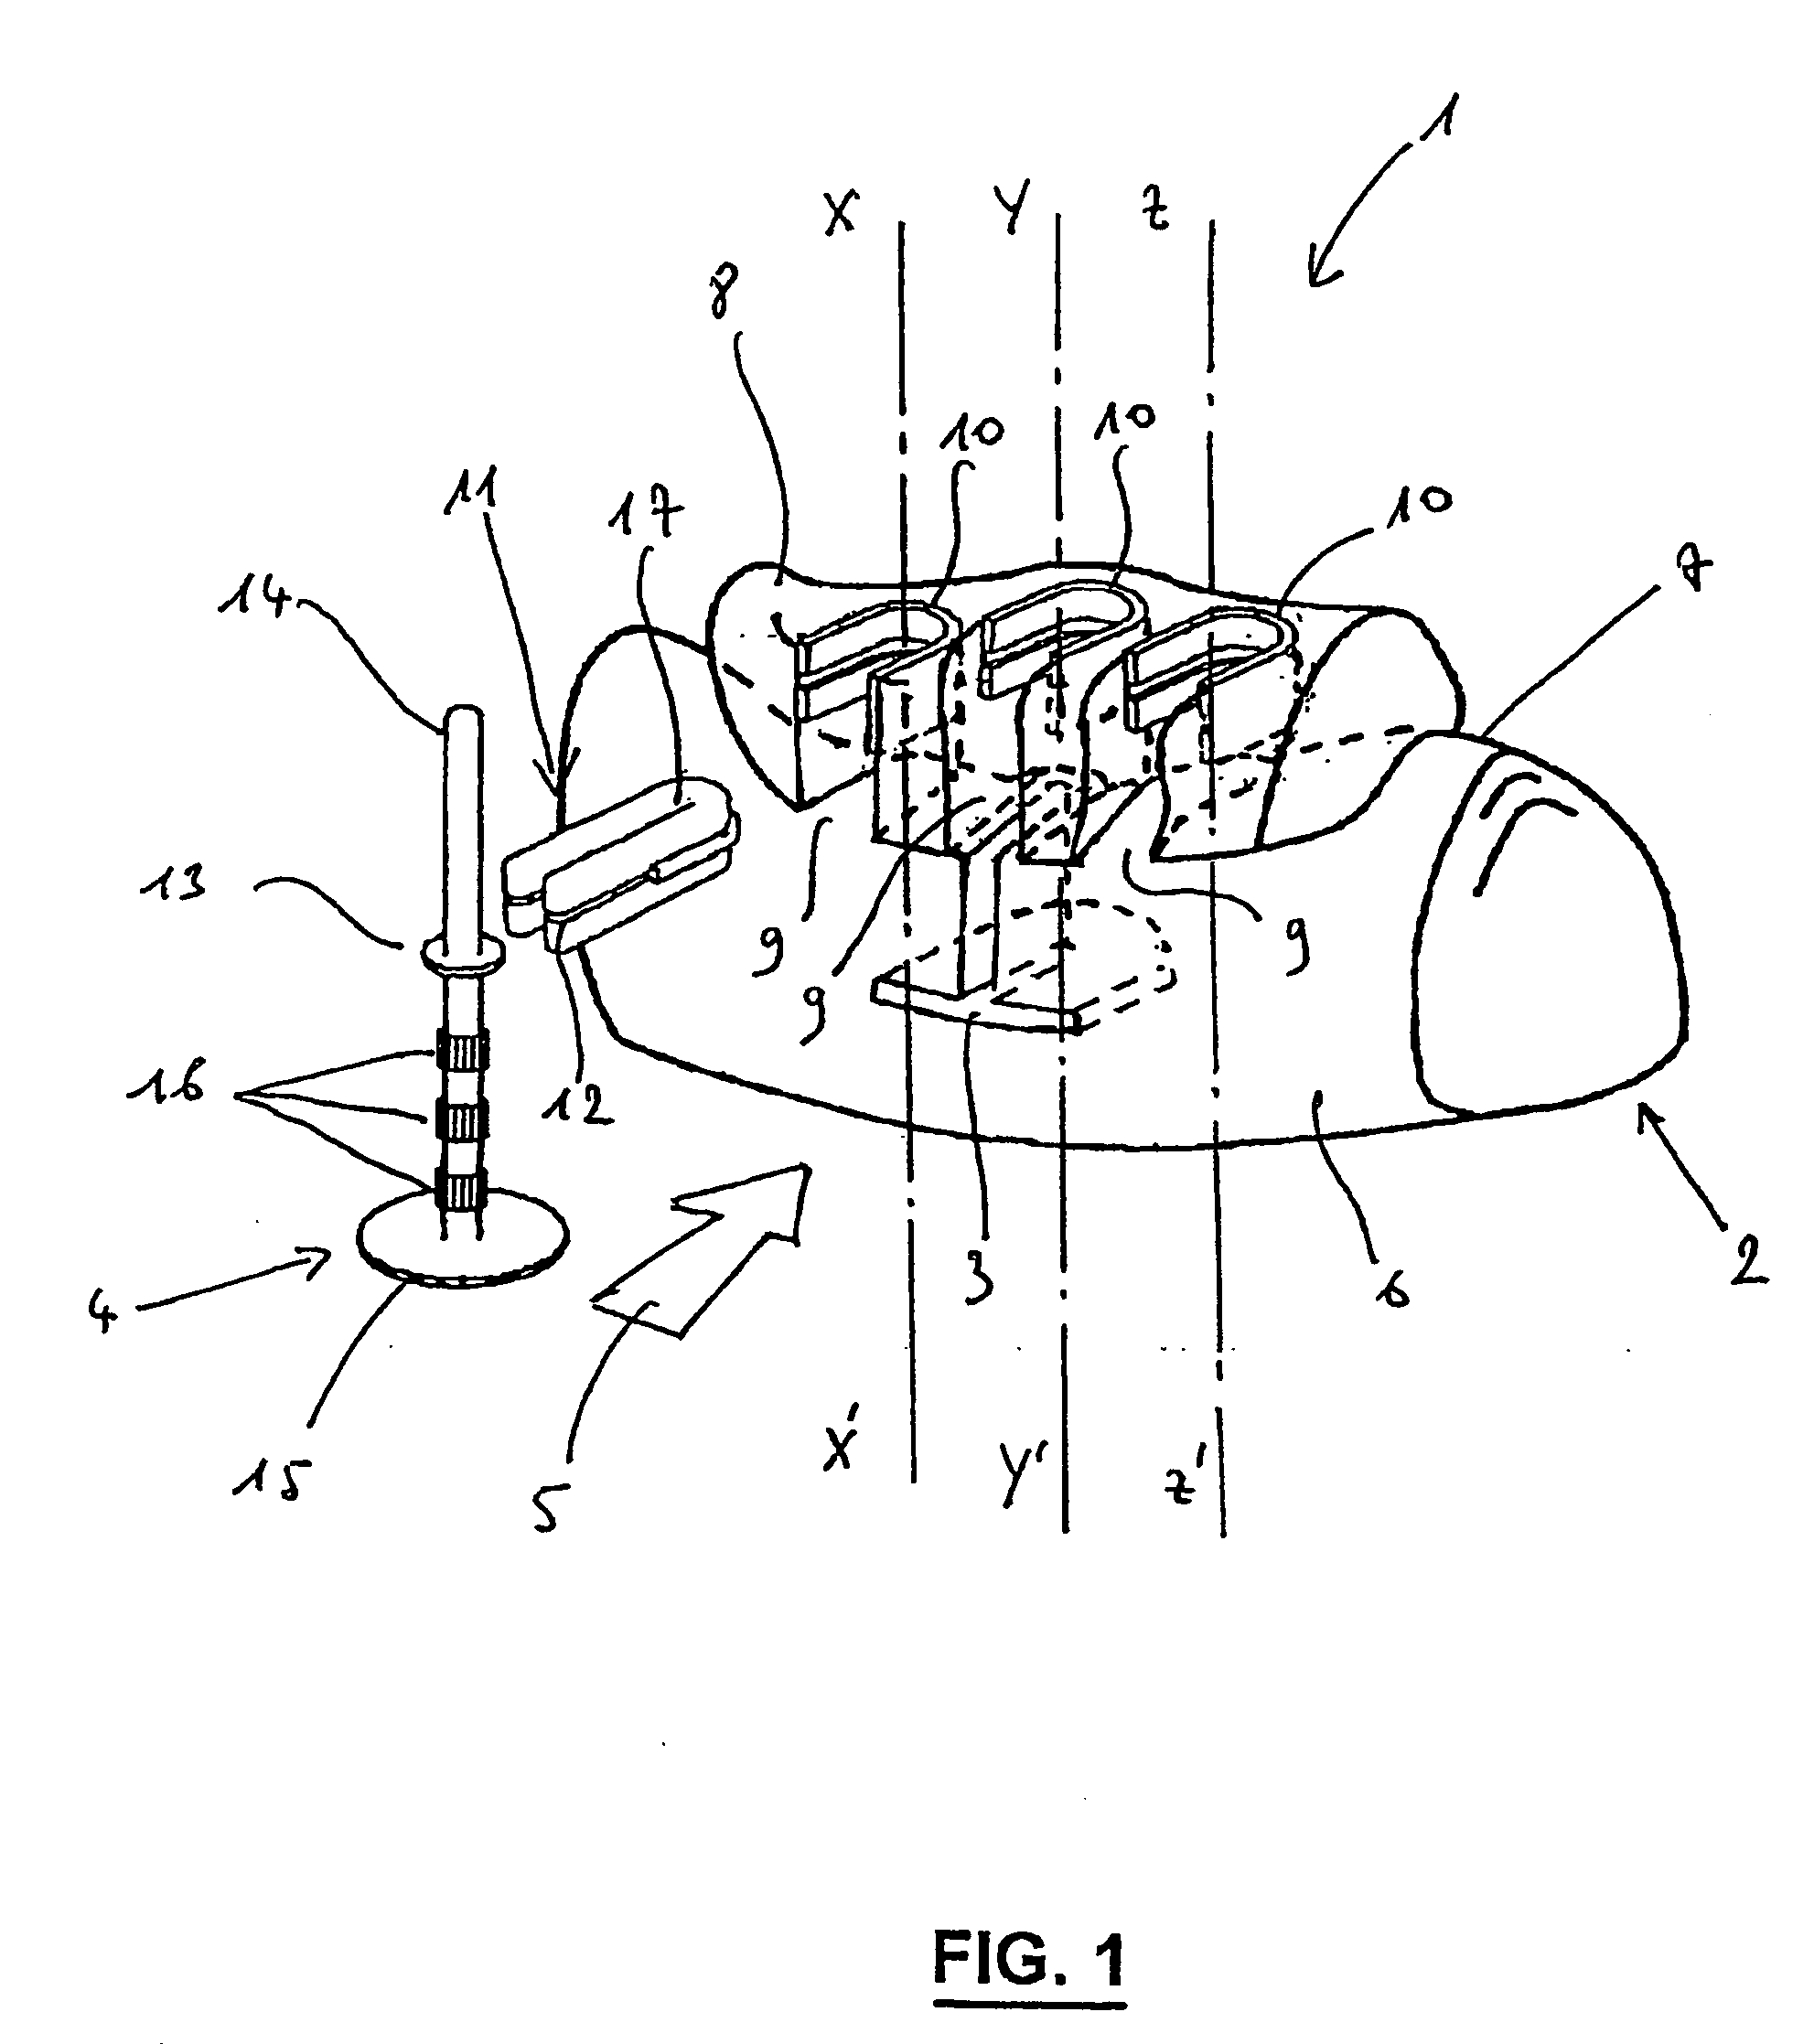 Custom-Fit Implantable Surgical Guide and Associated Milling Tool, Method for the Production and Use Thereof